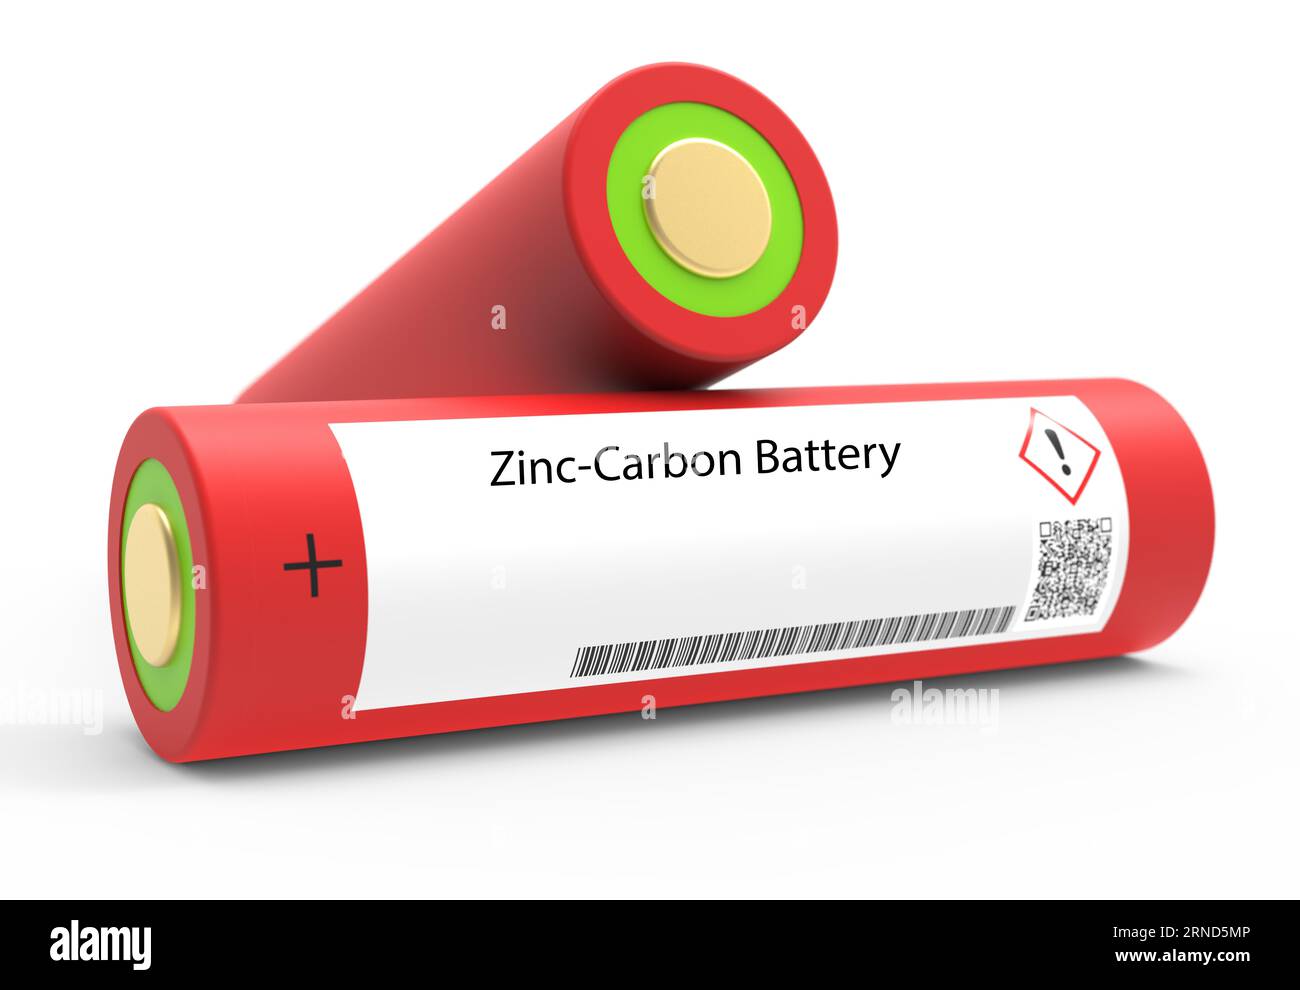 Zinc-carbon Battery A zinc-carbon battery is a primary battery that uses zinc as the negative electrode, and manganese dioxide and carbon as the posit Stock Photo